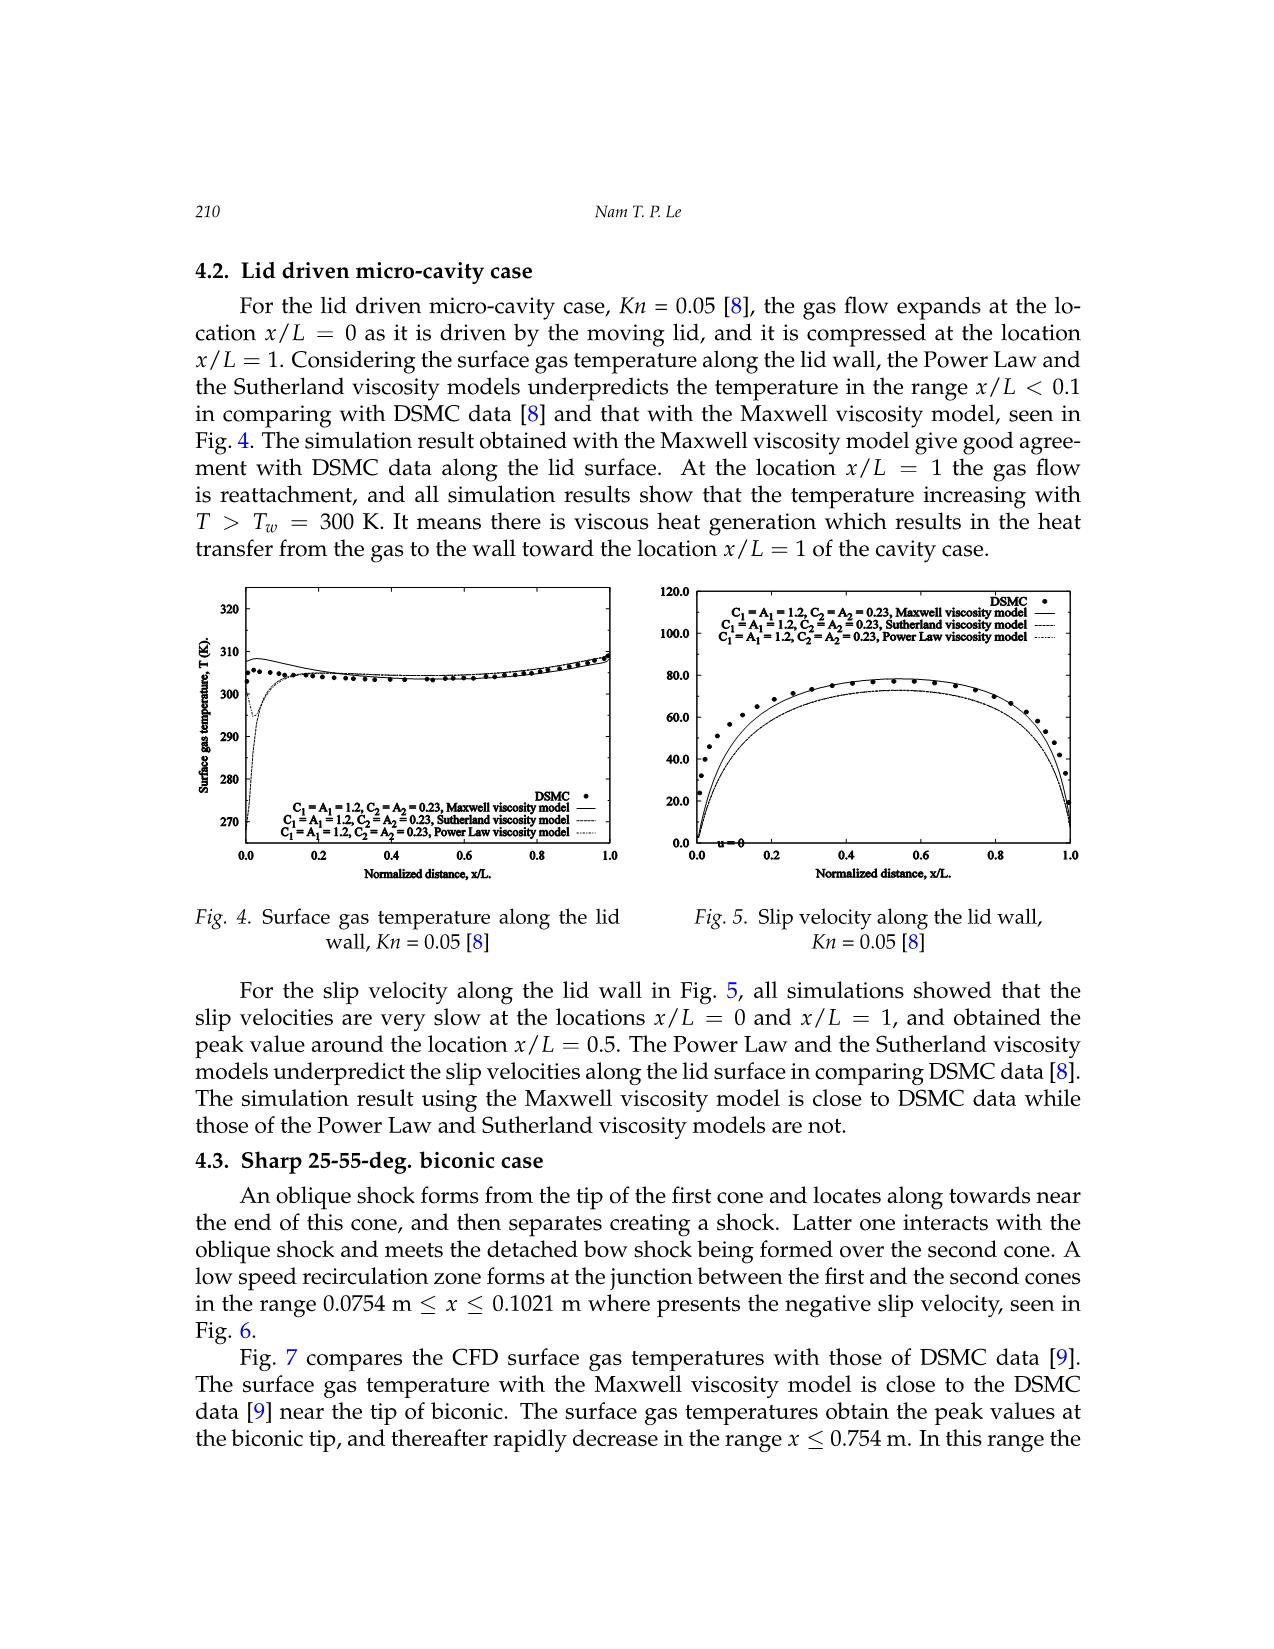 Effect of viscosity on slip boundary conditions in rarefied gas flows trang 8